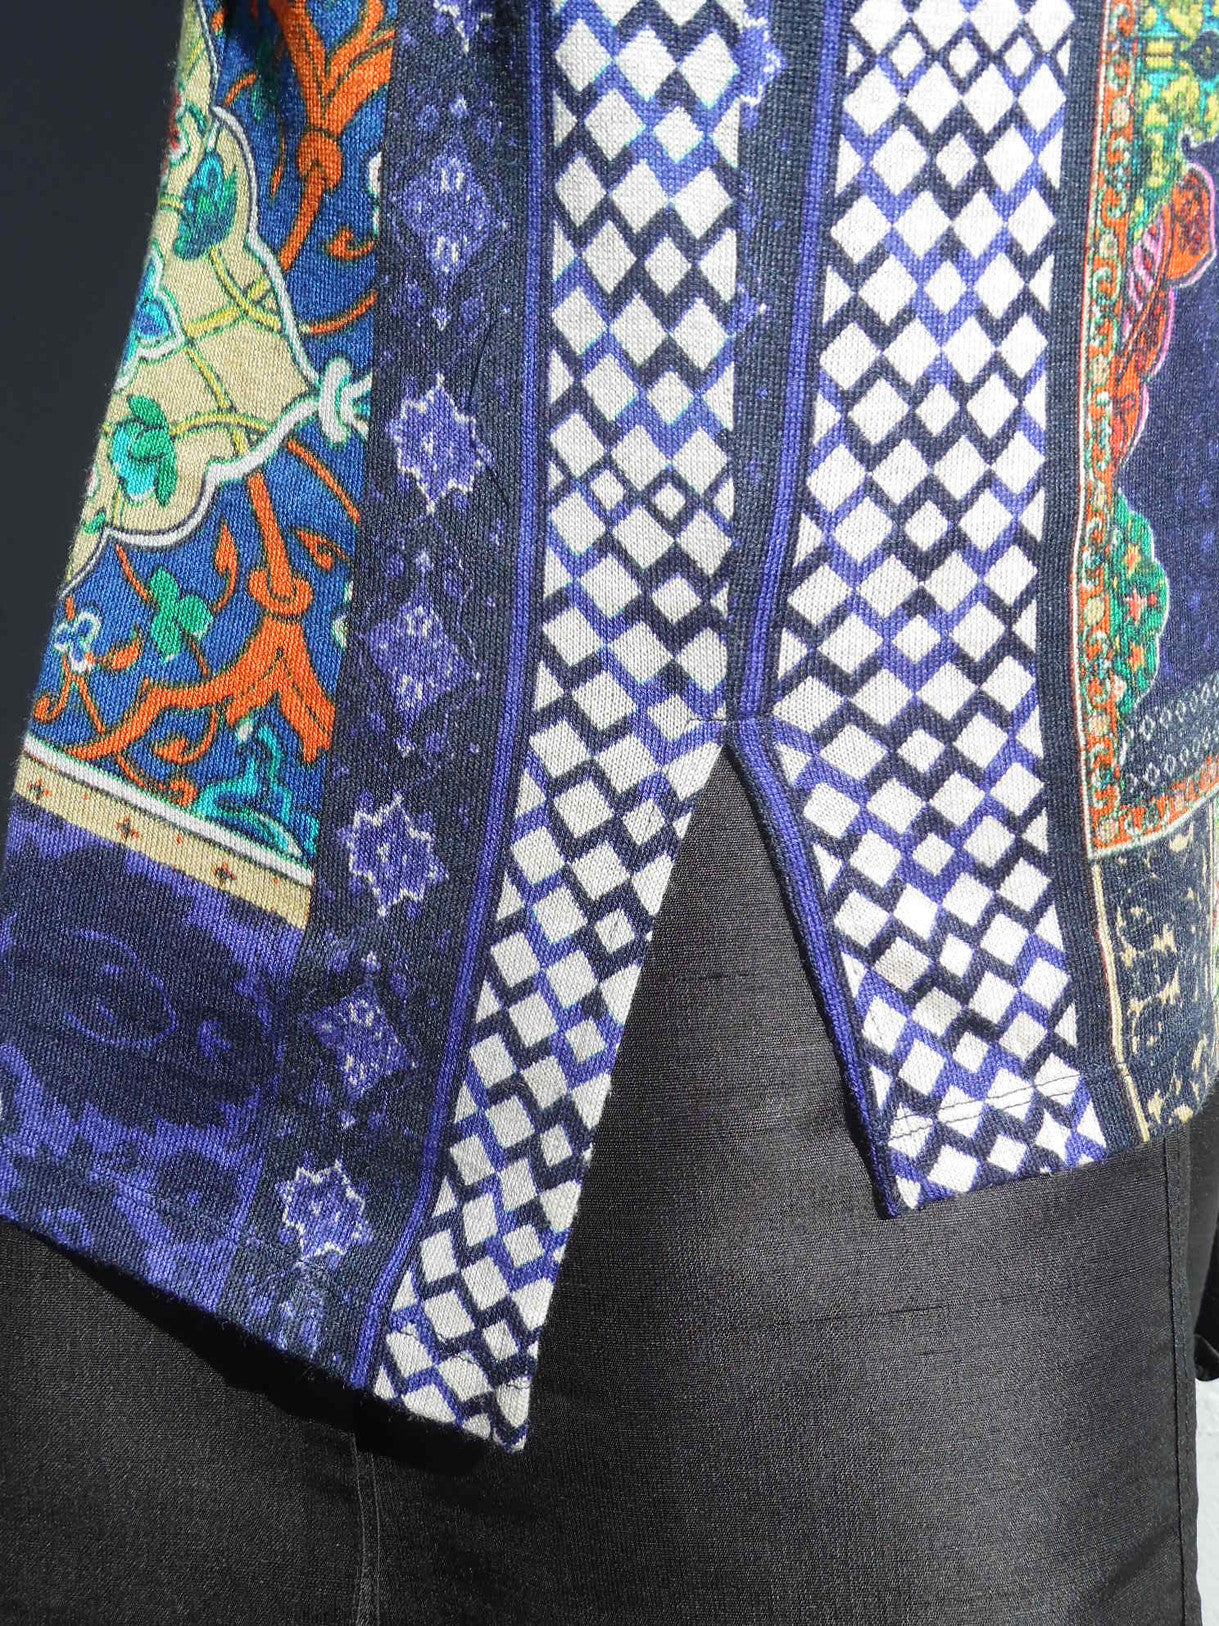 Cardigan Silk And Cashmere Paisley Black And Bright